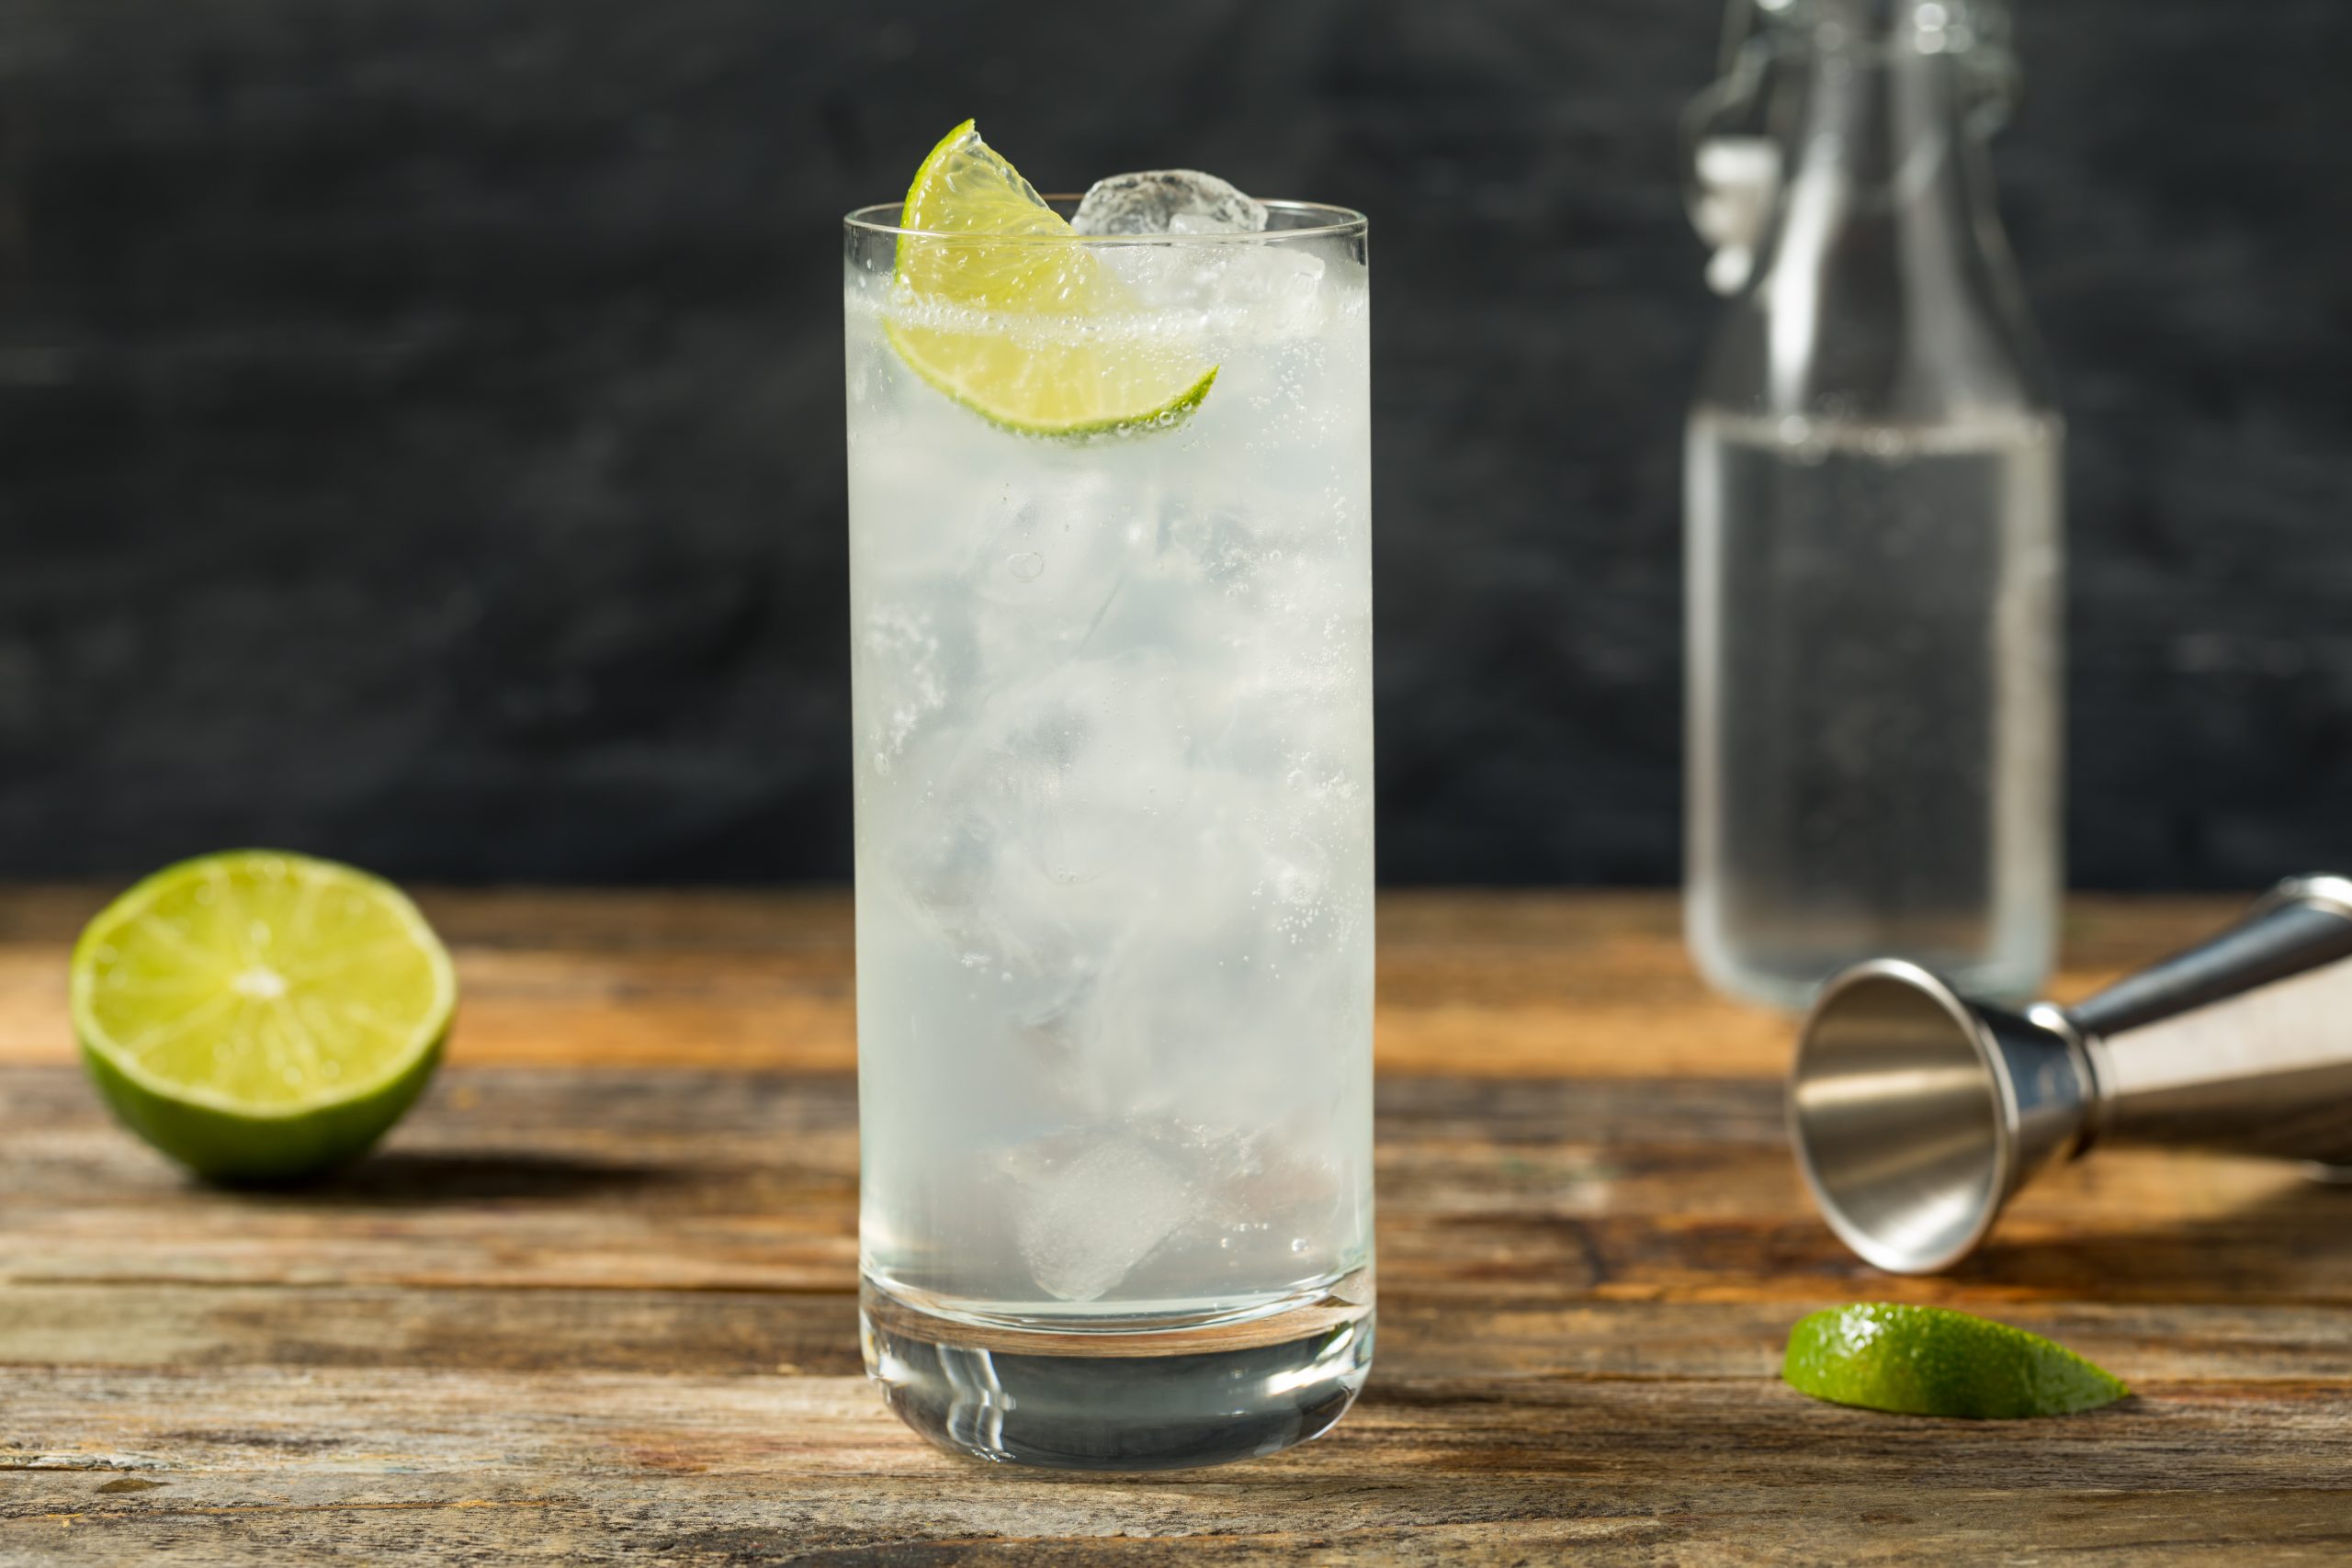 How Tequila and hard seltzer trends are boosting ranch waters’ popularity